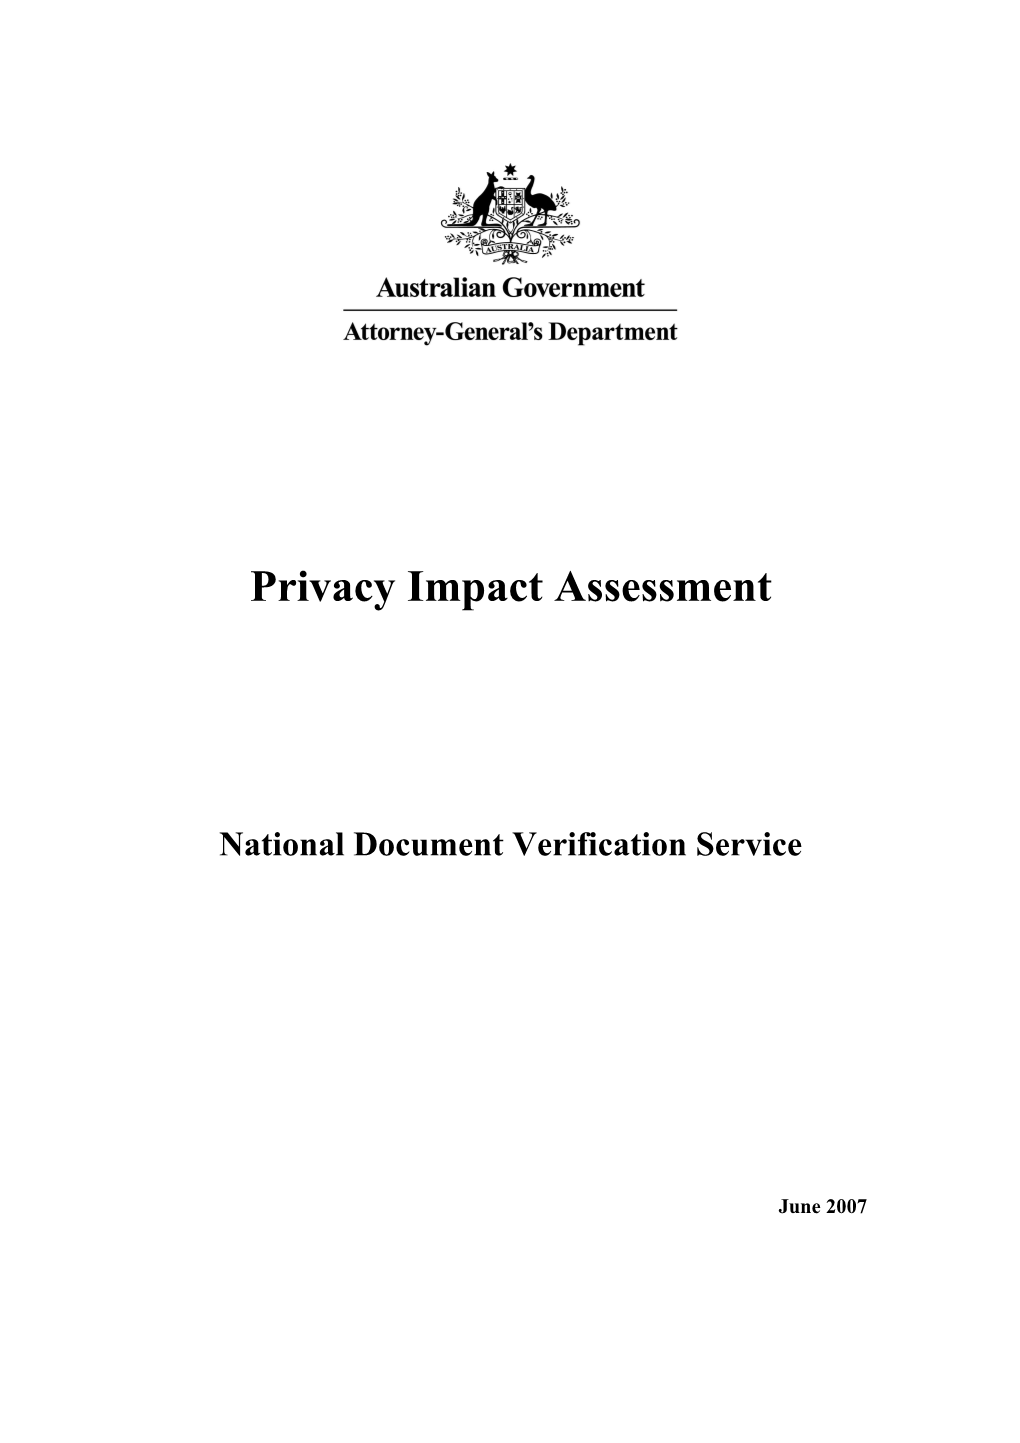 National DVS Privacy Impact Assessment